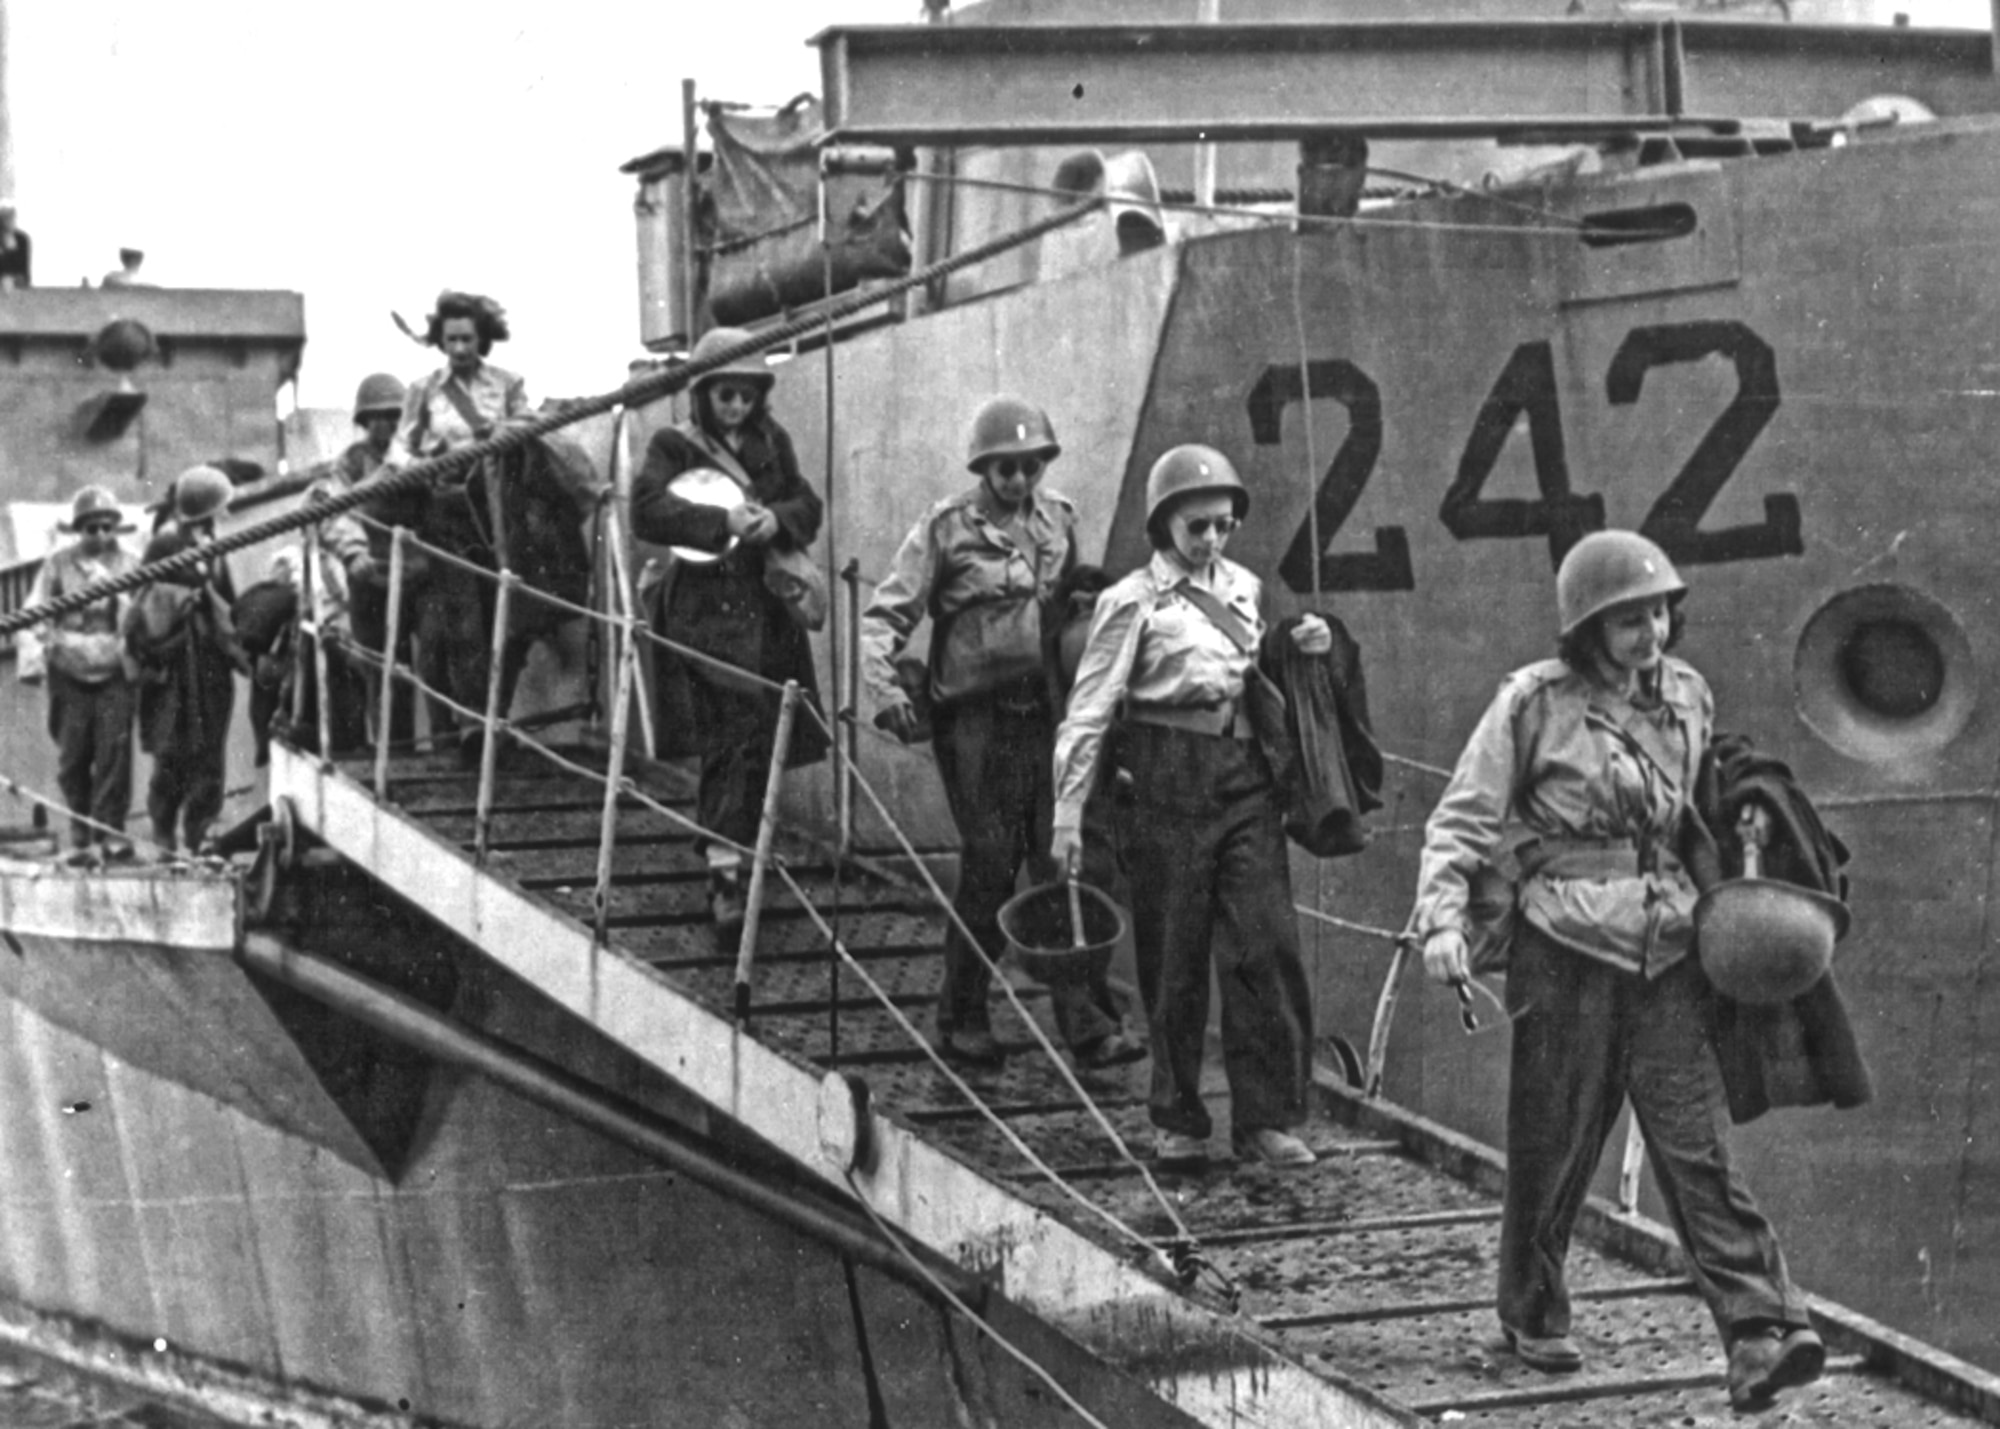 U.S. Army Air Forces nurses make their way down the ramp of their Landing Craft Infantry amphibious assault ship on the Mediterranean island of Pantelleria, Italy in 1943. The 34th Station Hospital on the island became the first Army Air Forces hospital truly attached to an Army Air Forces unit. (National Archives)